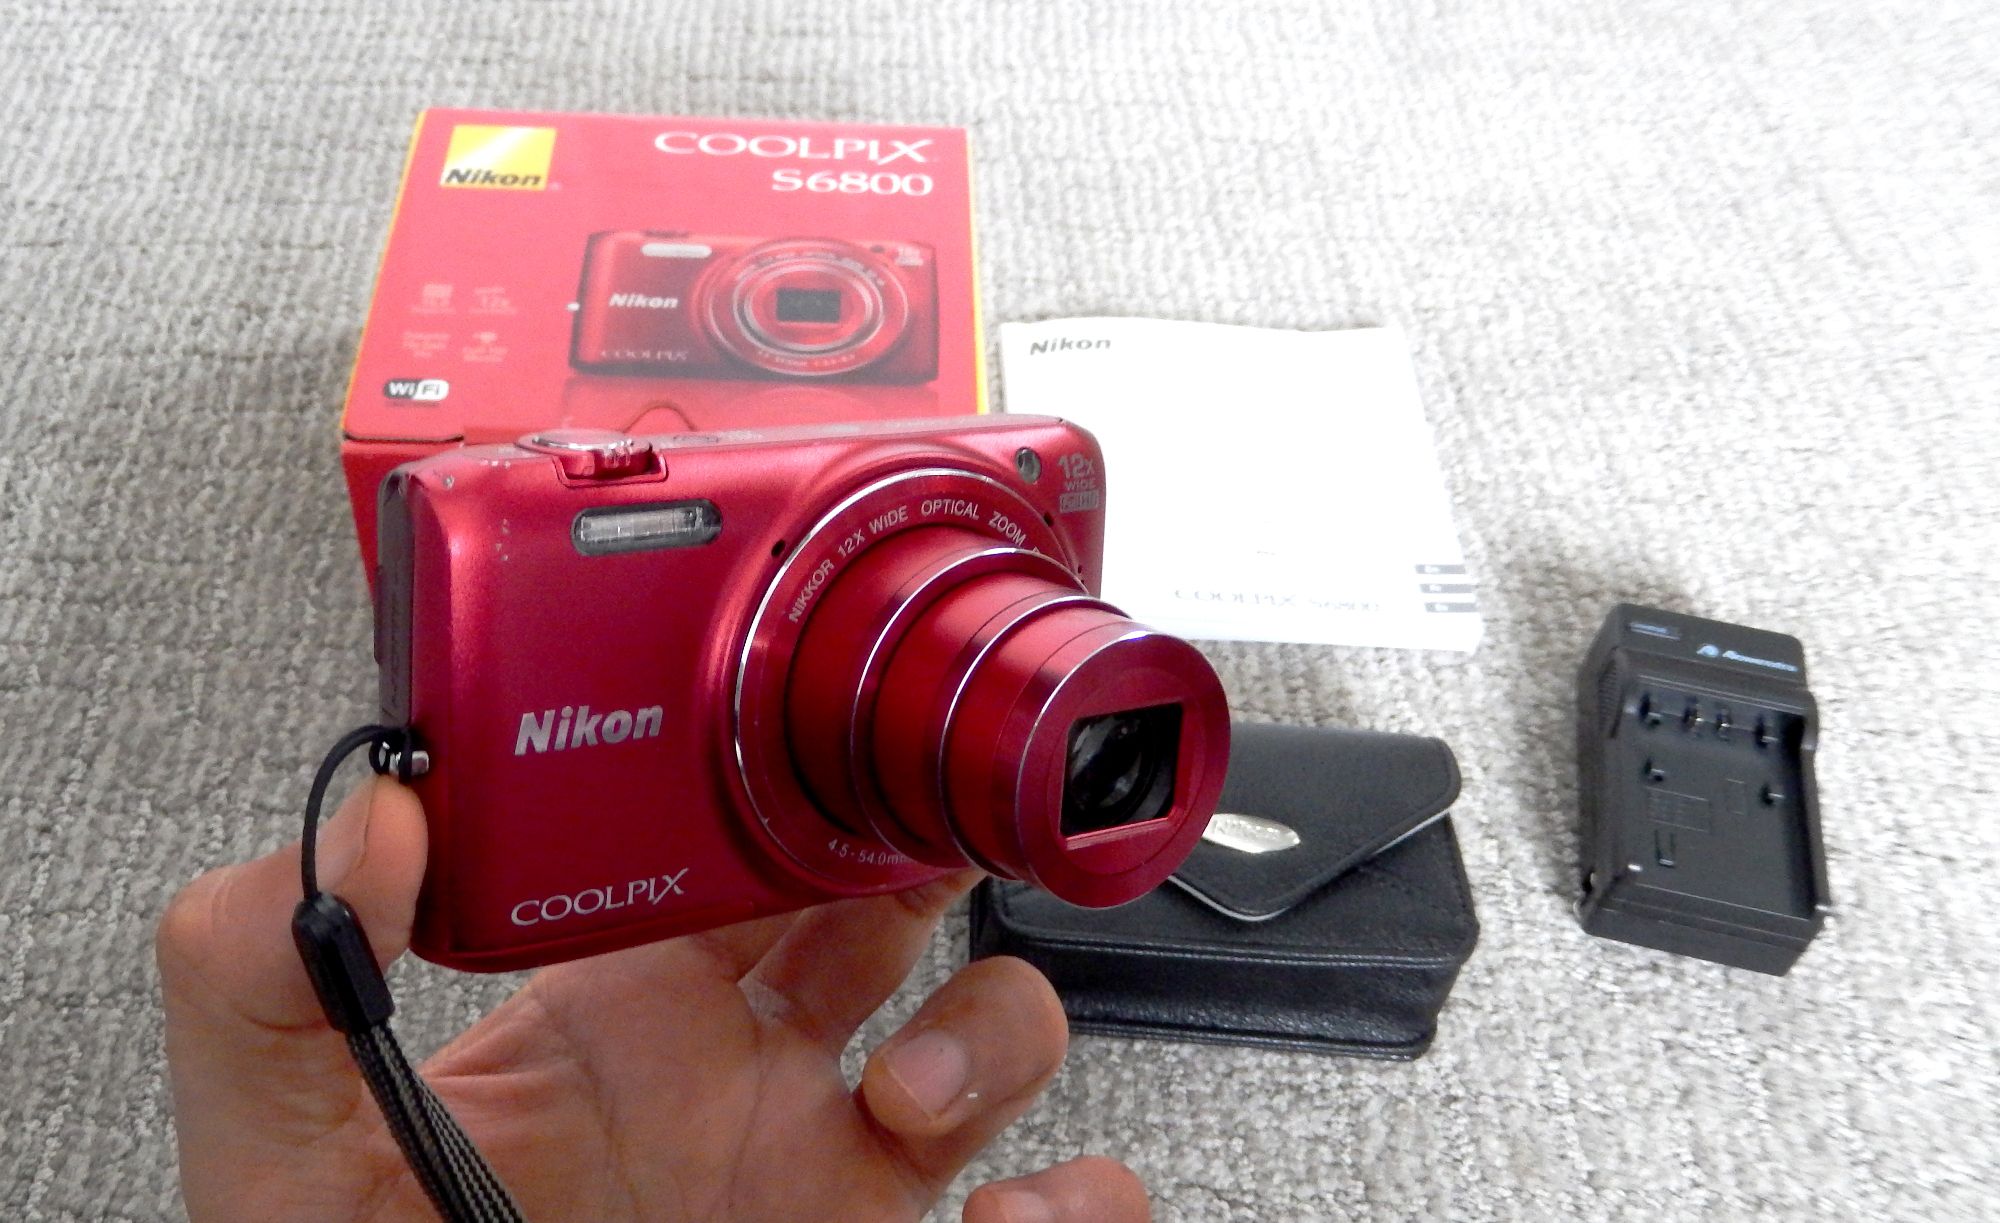 Nikon Coolpix Digital Camera.Red. 16 mpx.WiFi connectivity Full HD video (1920x1080),NEW Battery, Charger included.